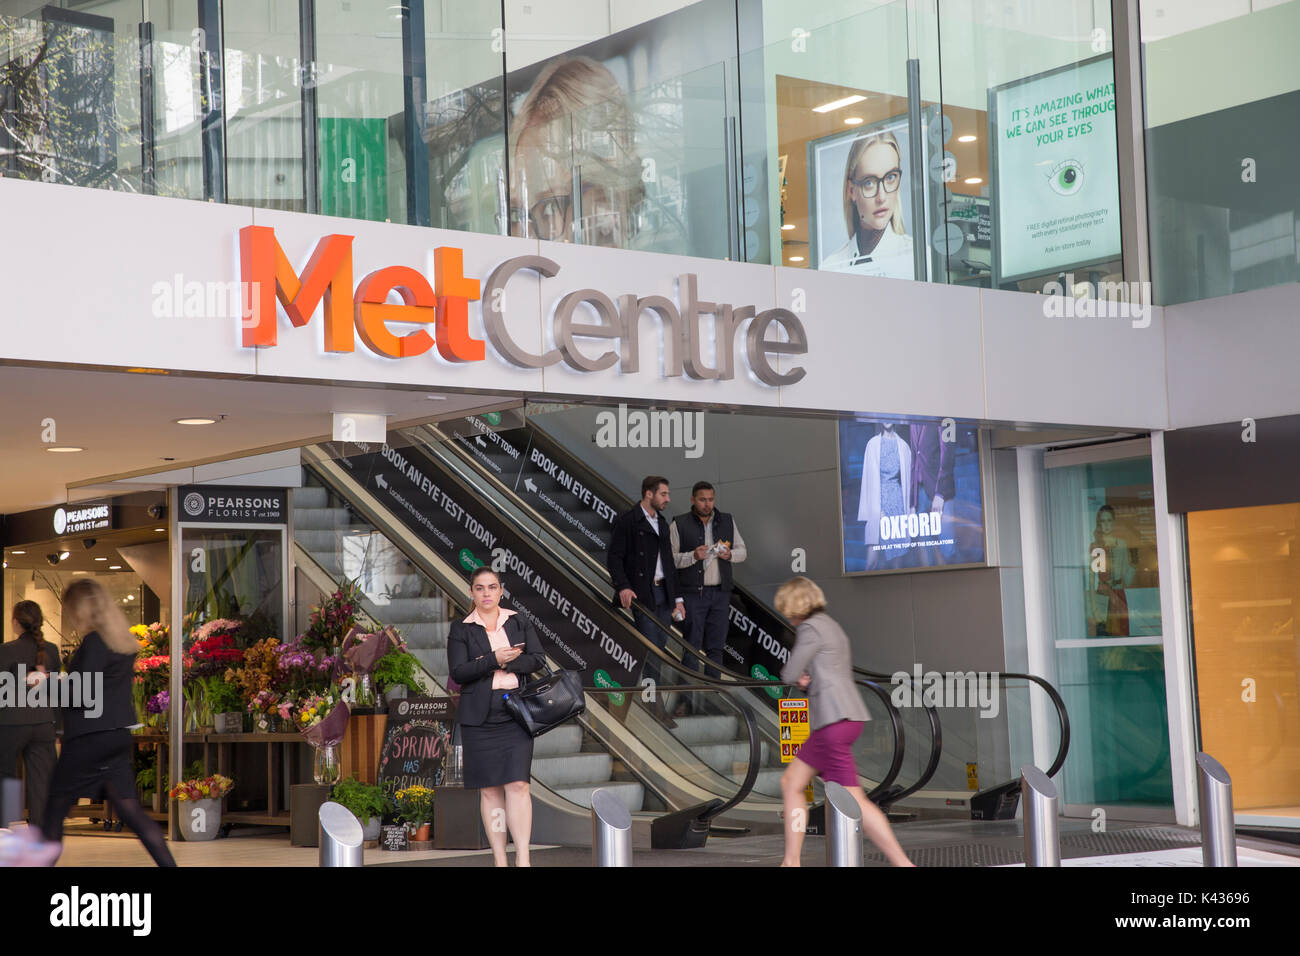 Metcentre shopping centre store mall in Sydney city centre contains food court and range of boutique retail stores , Sydney,Australia Stock Photo